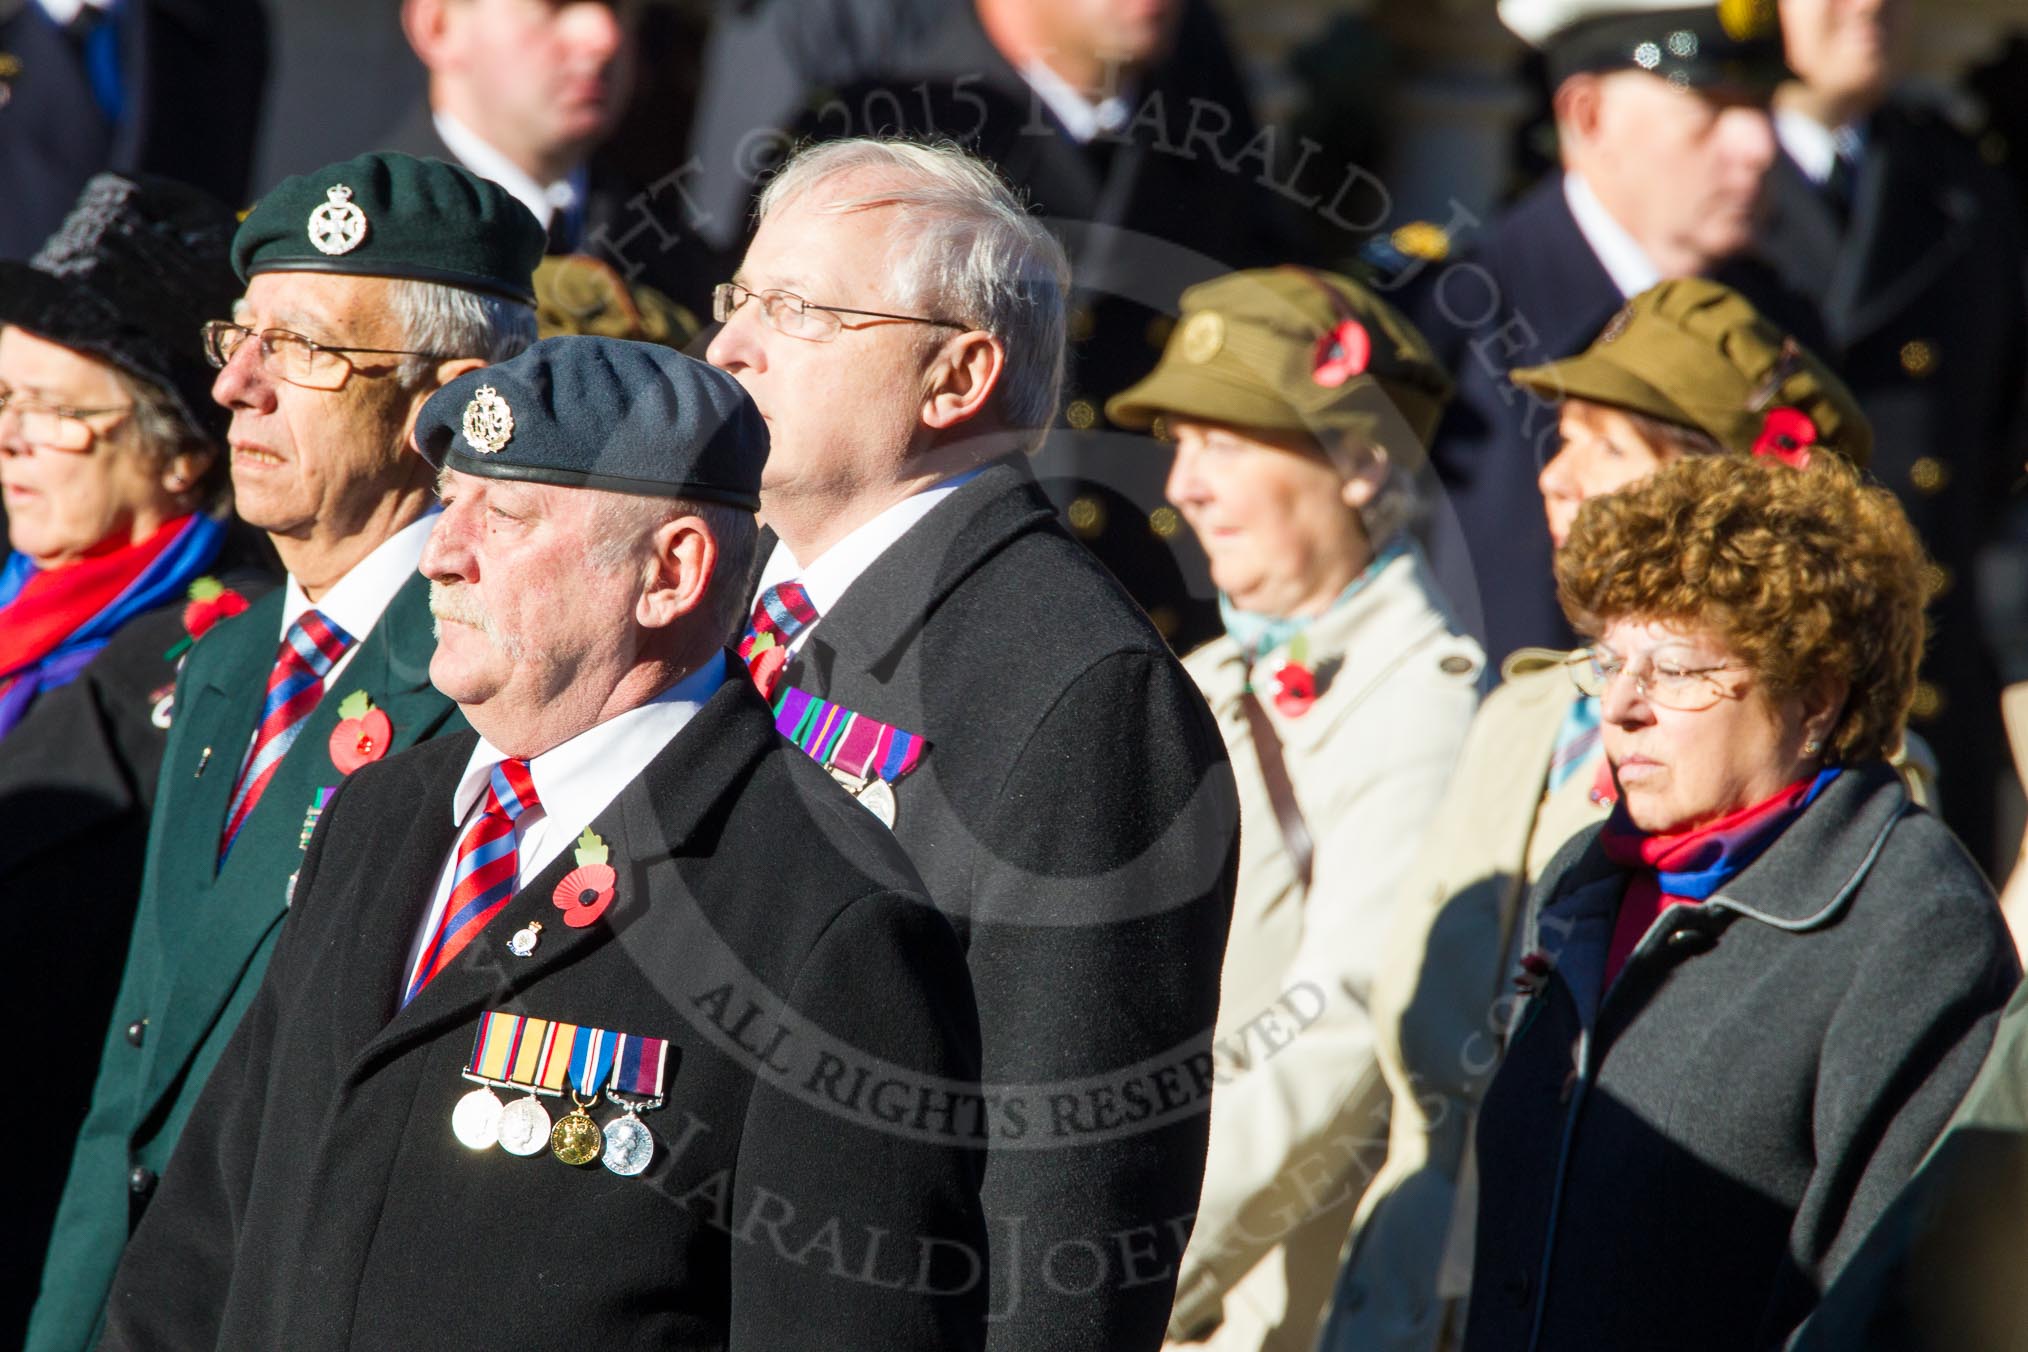 Remembrance Sunday Cenotaph March Past 2013: D24 - SSAFA Forces Help, set up to help former and serving members of the British Armed Forces and their families or dependants. On the left, with the RAF beret, is the Parade Commander, Mr Kevin Trethowan, who has volunteered for SSAFA since 1998..
Press stand opposite the Foreign Office building, Whitehall, London SW1,
London,
Greater London,
United Kingdom,
on 10 November 2013 at 11:41, image #202